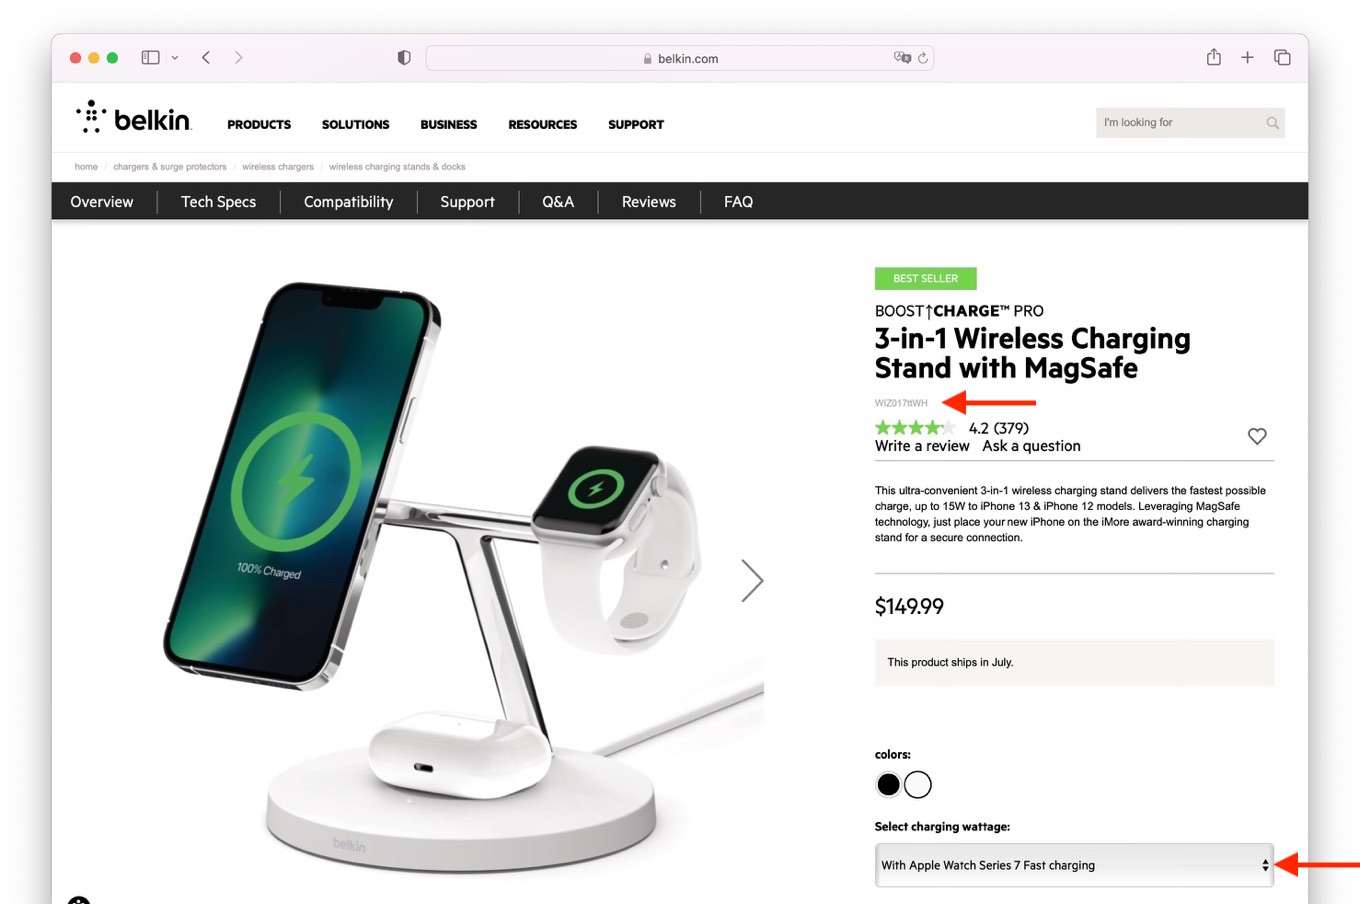 BOOST↑CHARGE™ PRO 3-in-1 Wireless Charging Stand with MagSafe